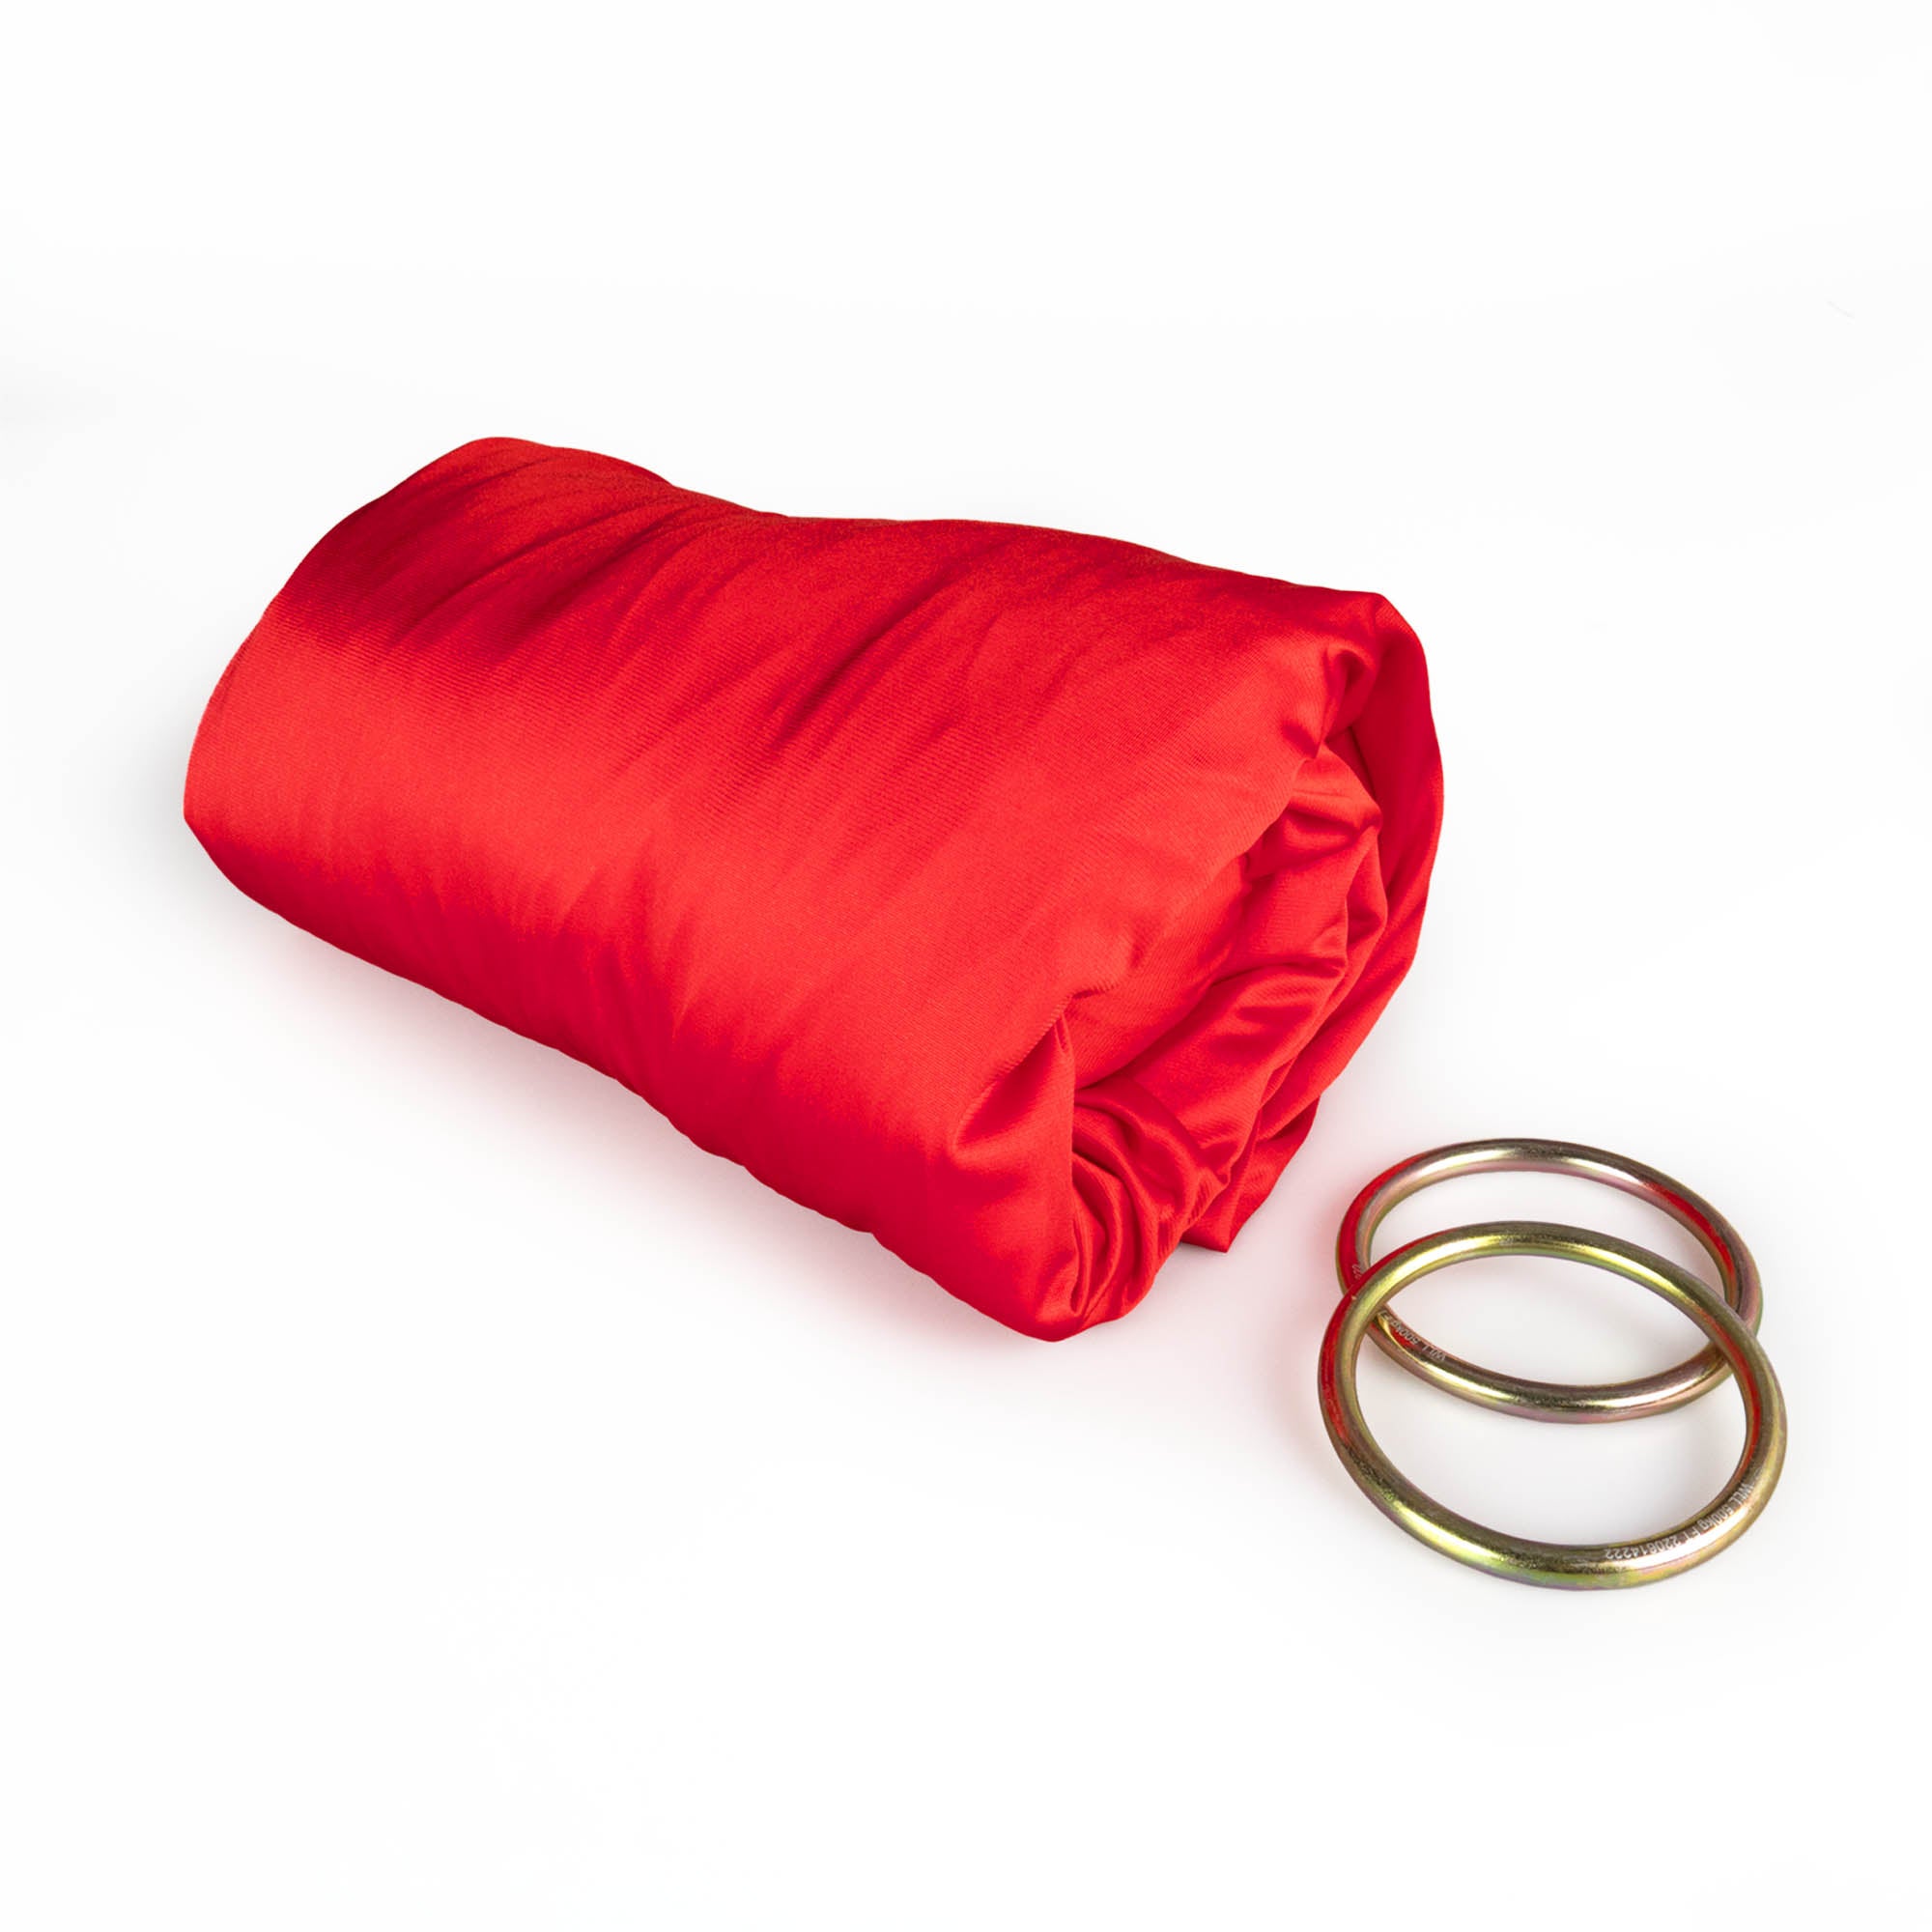 Red yoga hammock rolled up with ring dettached